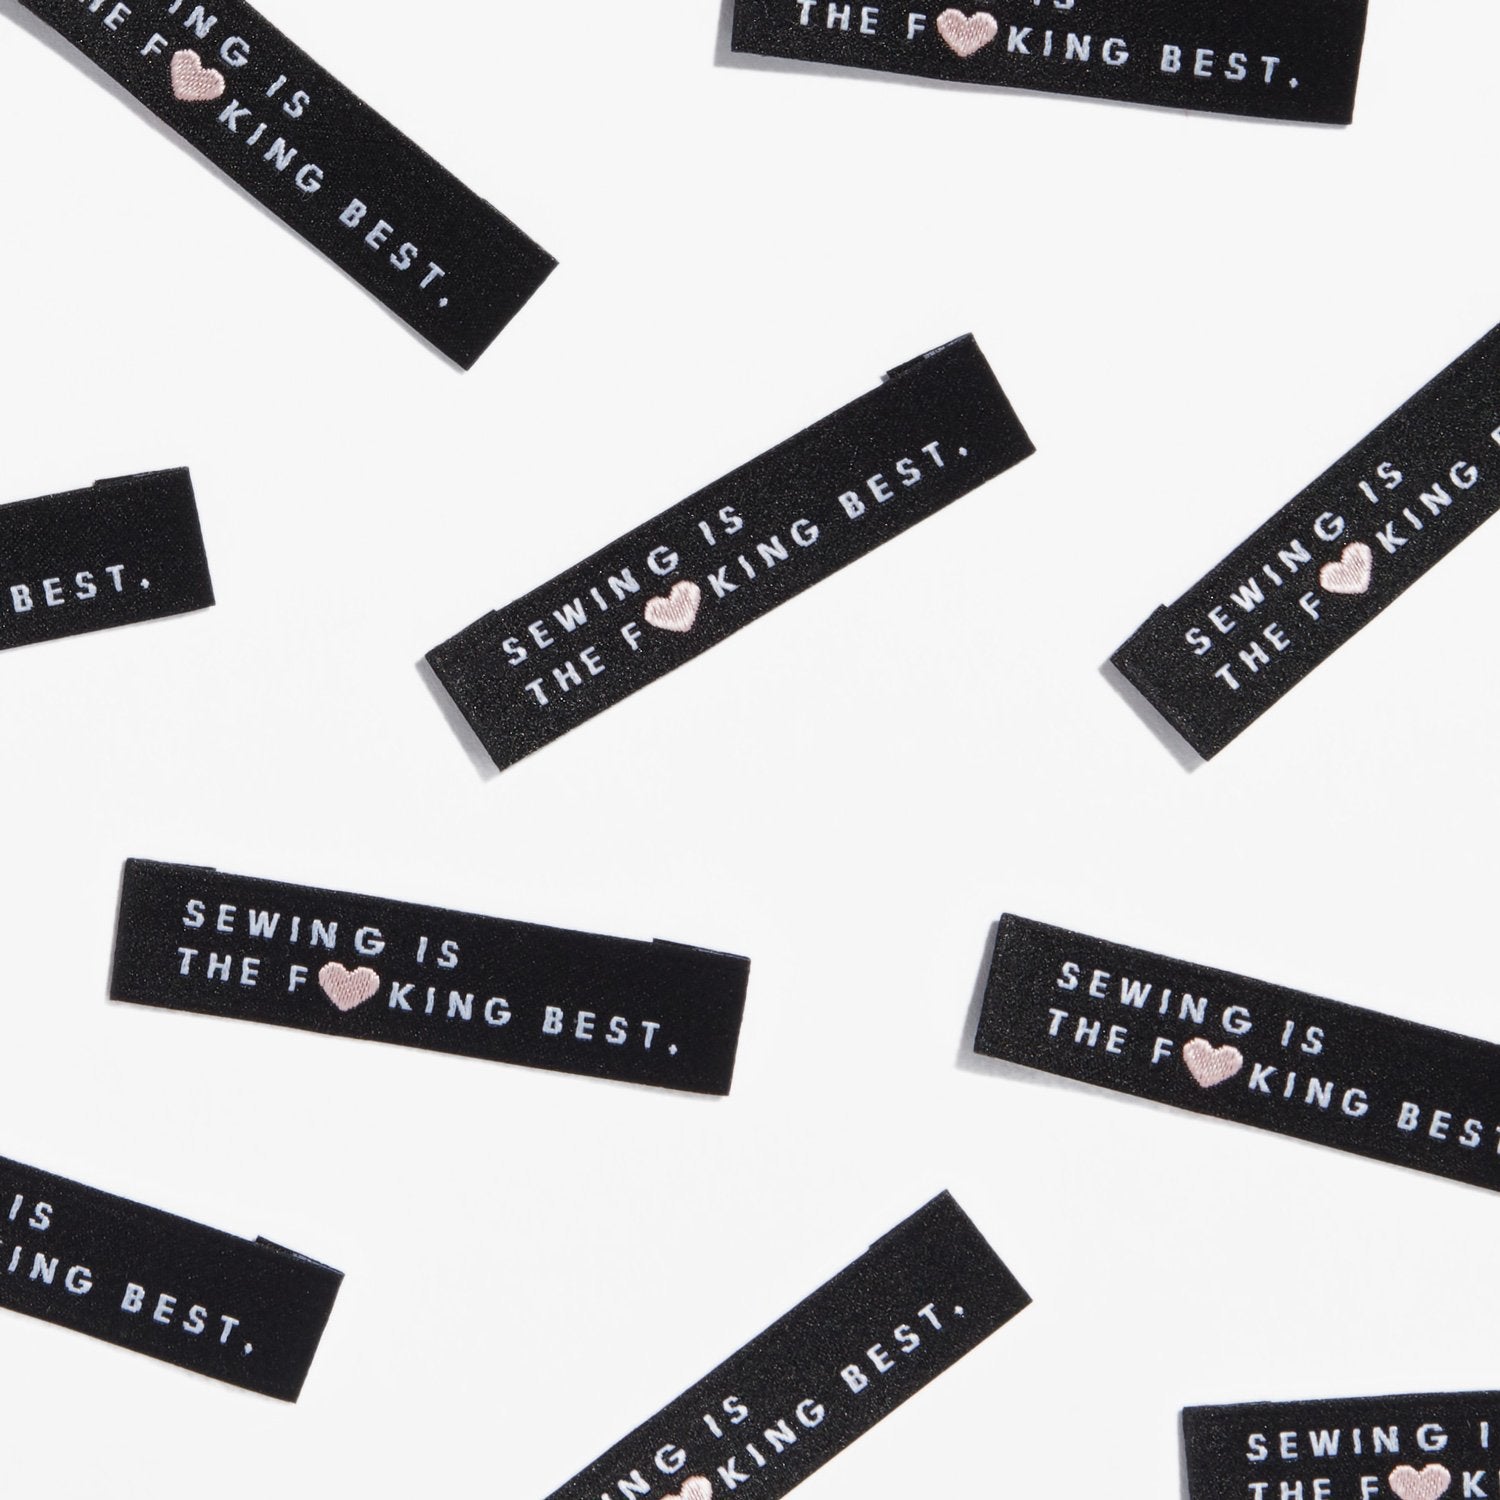 &quot;SEWING IS THE F**KING BEST&quot; Woven Labels 8 Pack